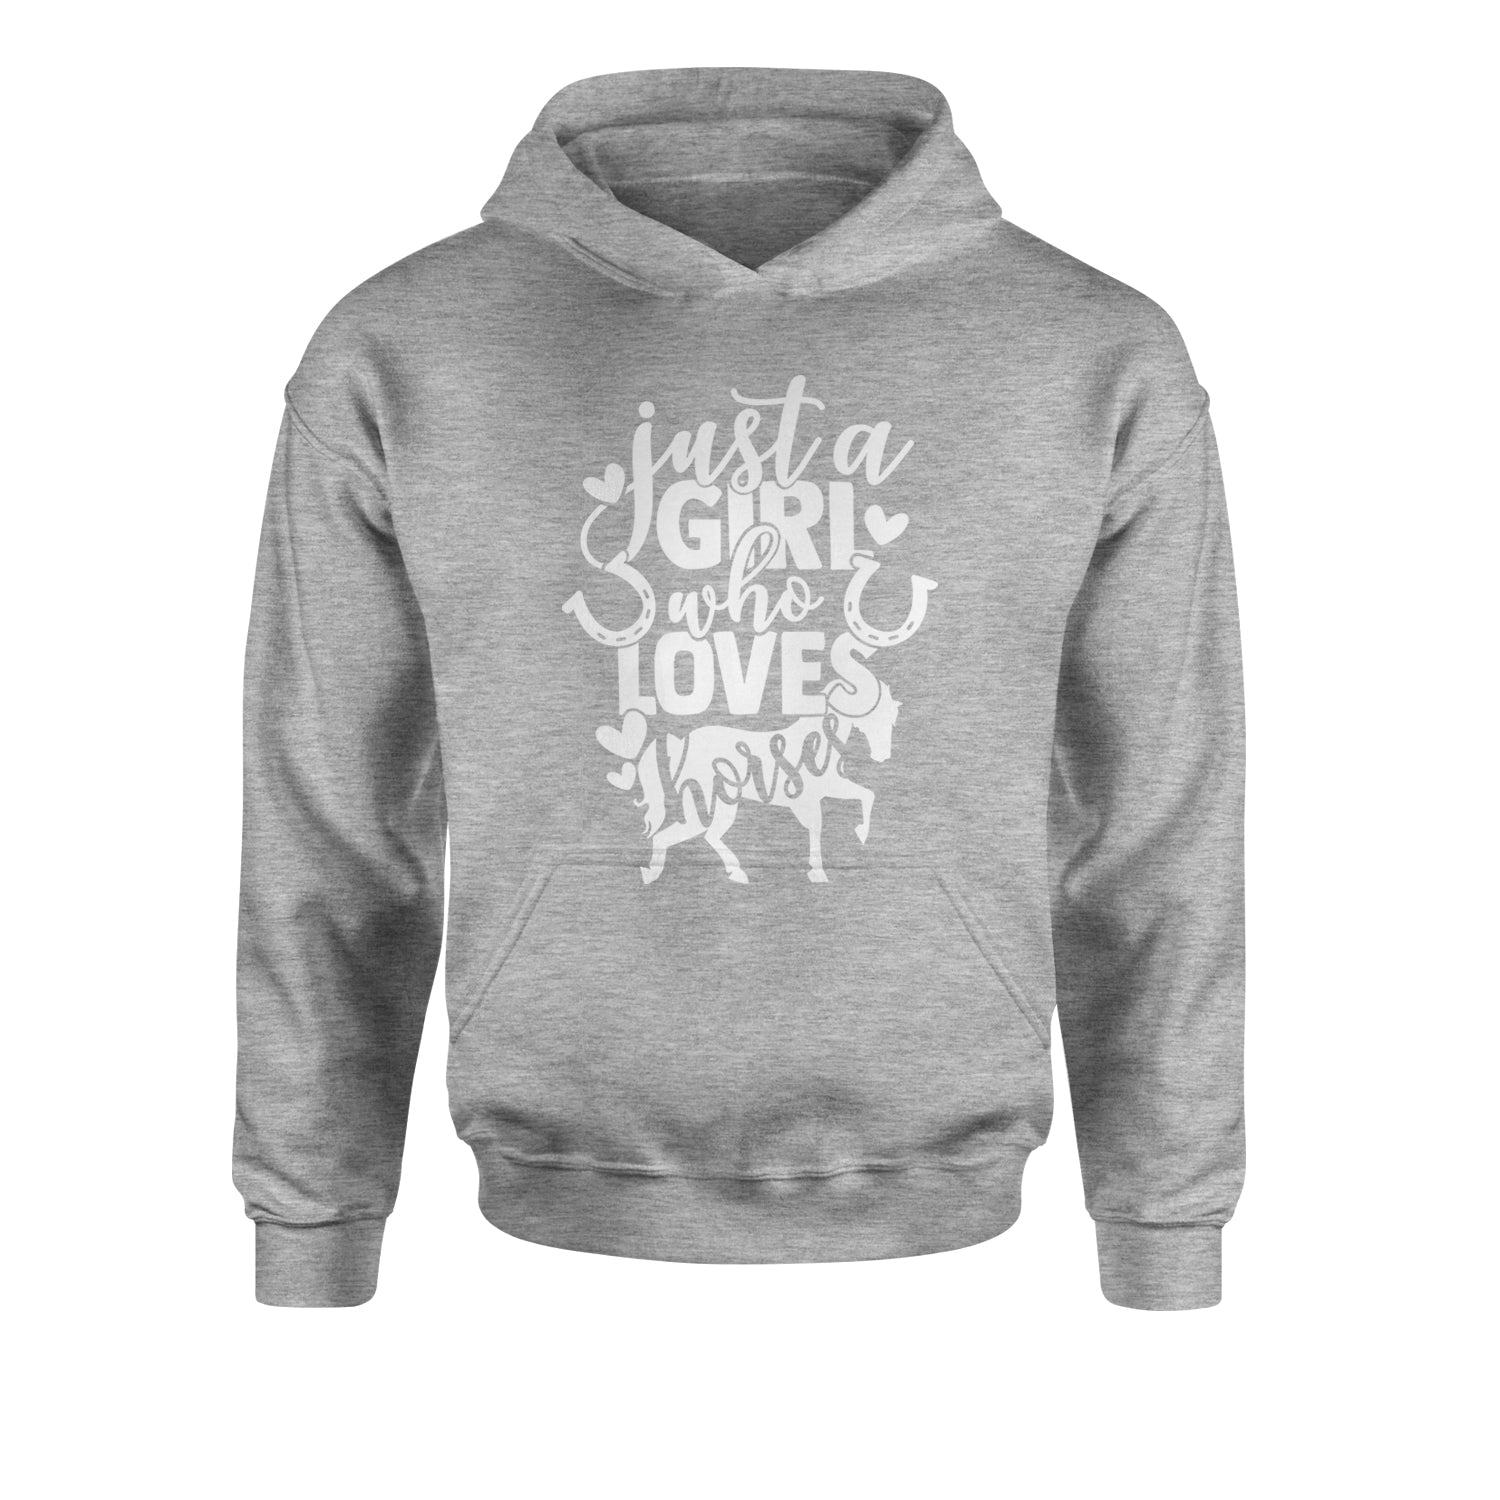 Just A Girl Who Loves Horses Youth-Sized Hoodie equestrian, equine, horse, horses, horseshoe, ponies, pony, shoe by Expression Tees